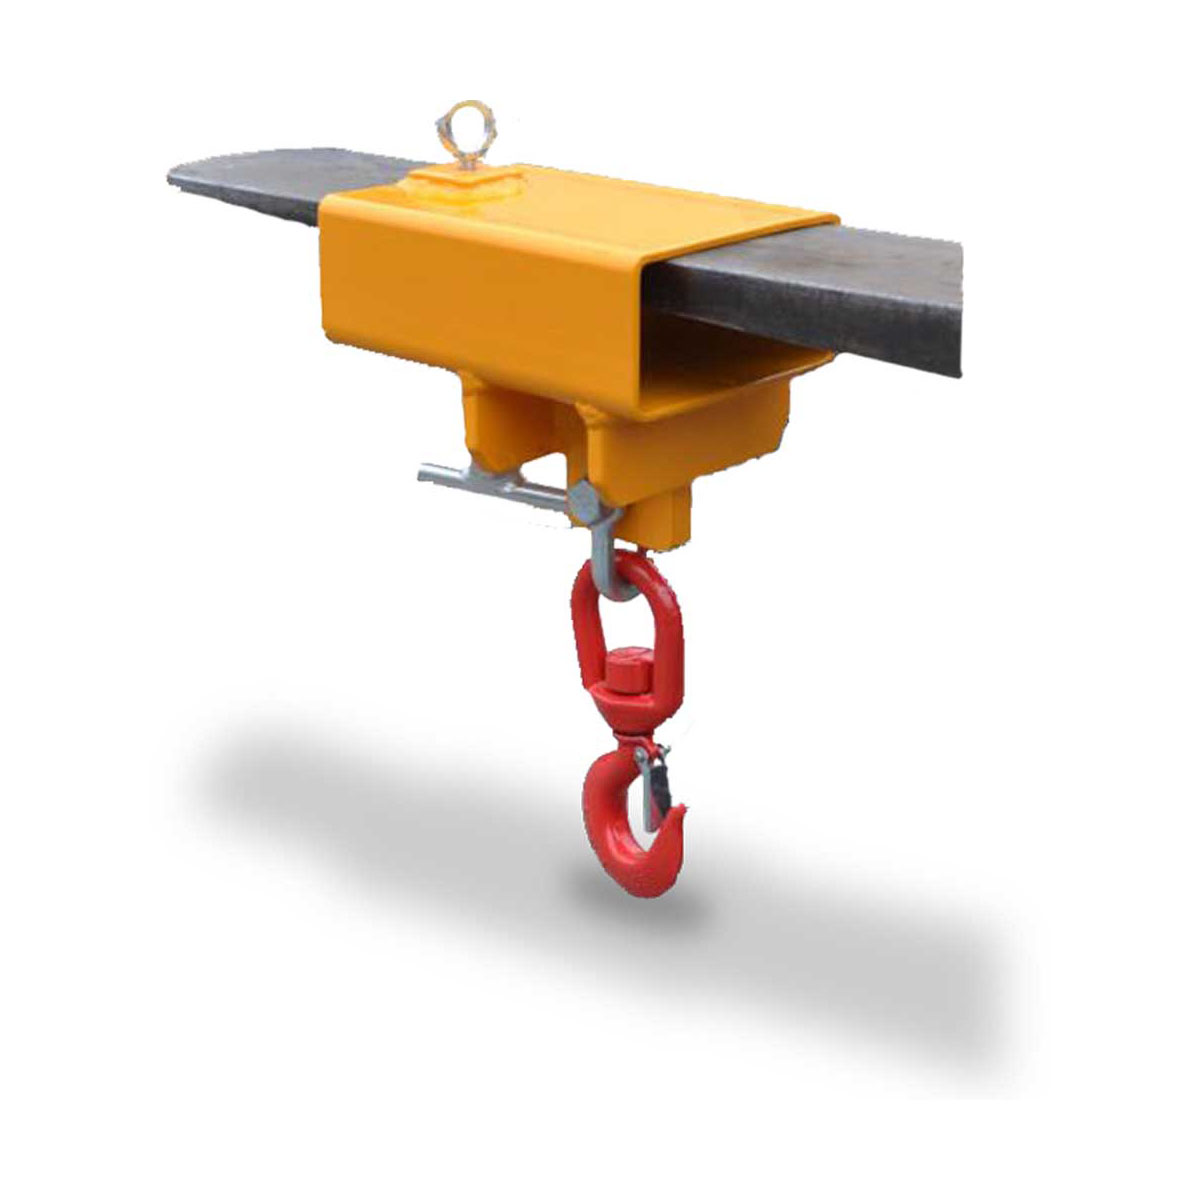 Buy Hook - Single Fork in Forklift Attachments from Astrolift NZ